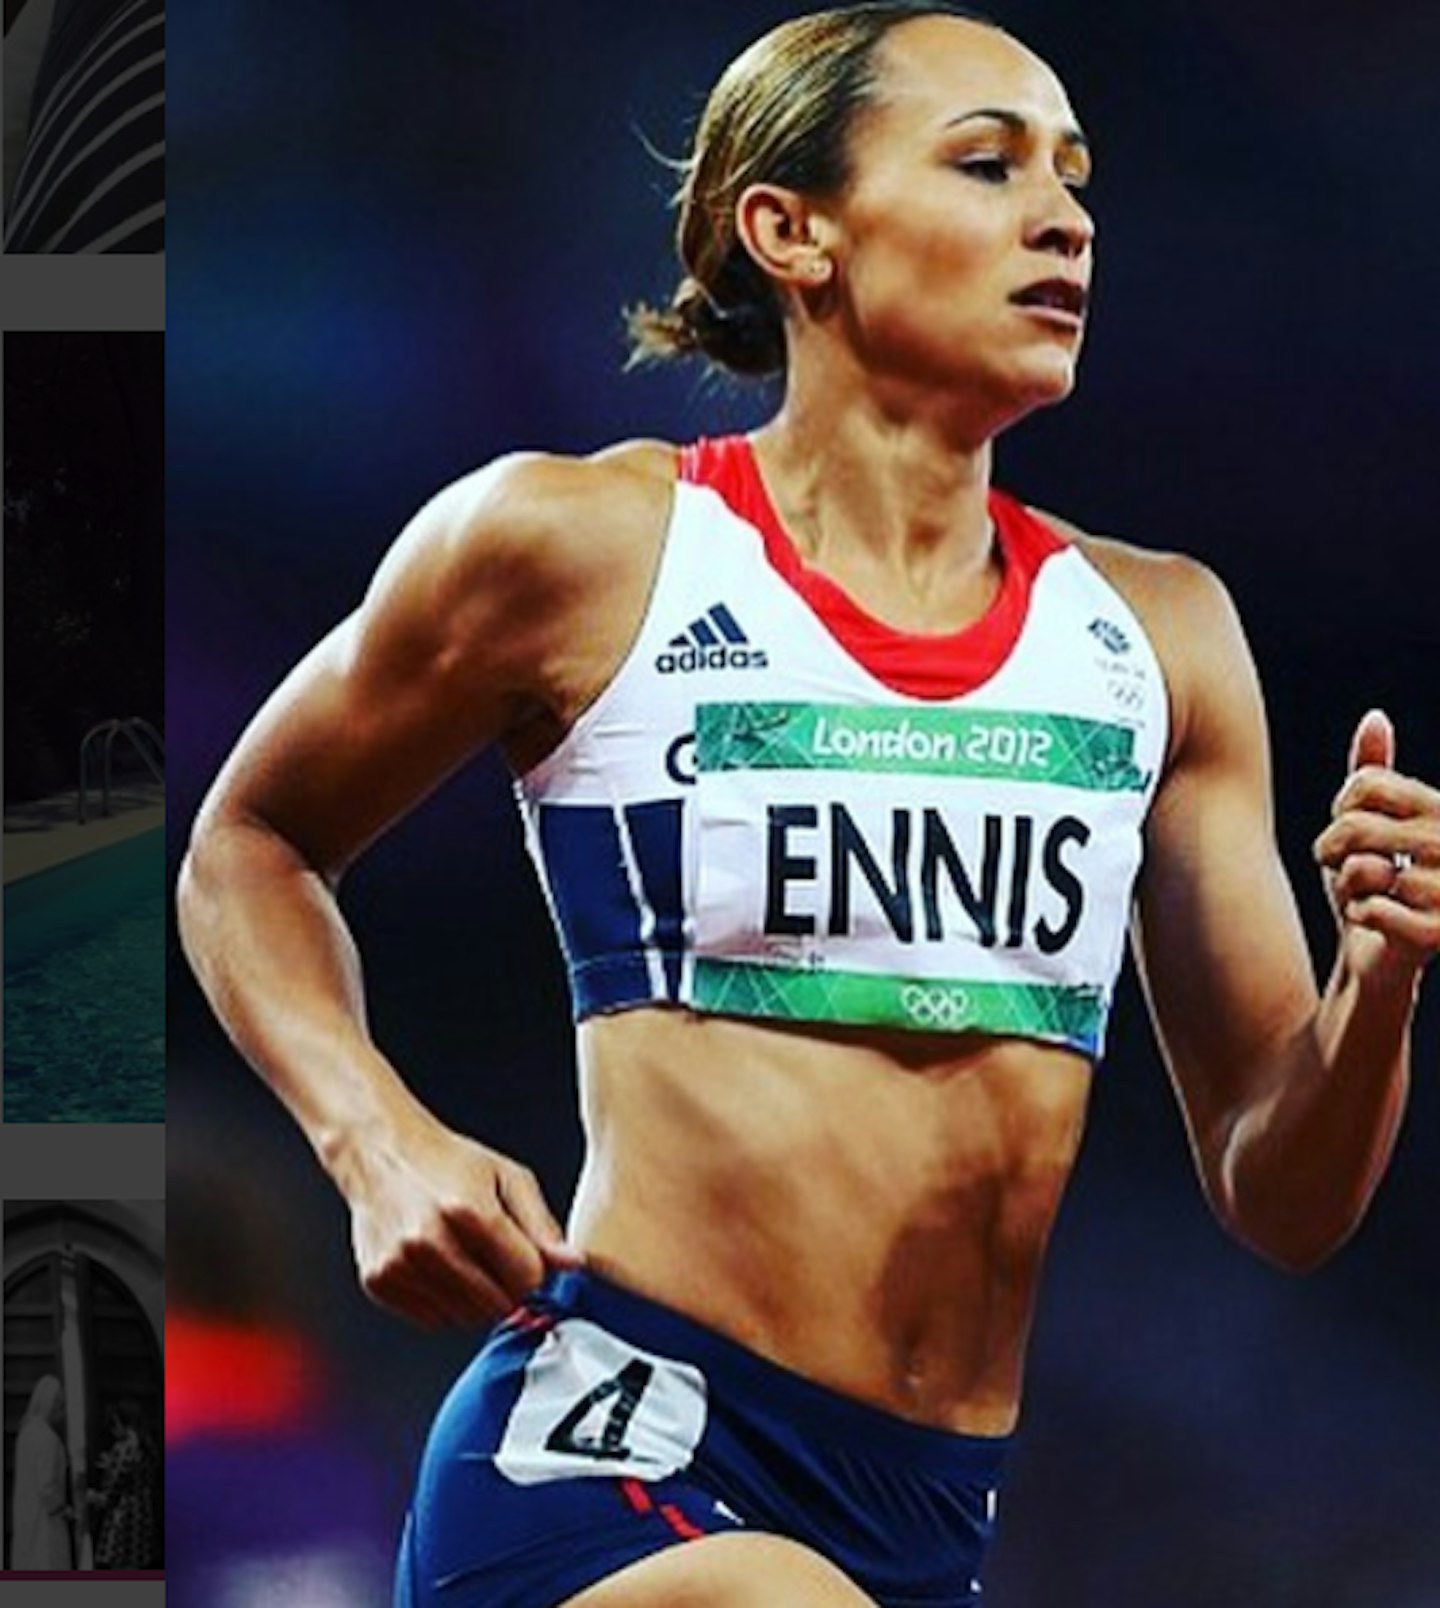 Jessica Ennis Hill competing at the 2012 Olympics